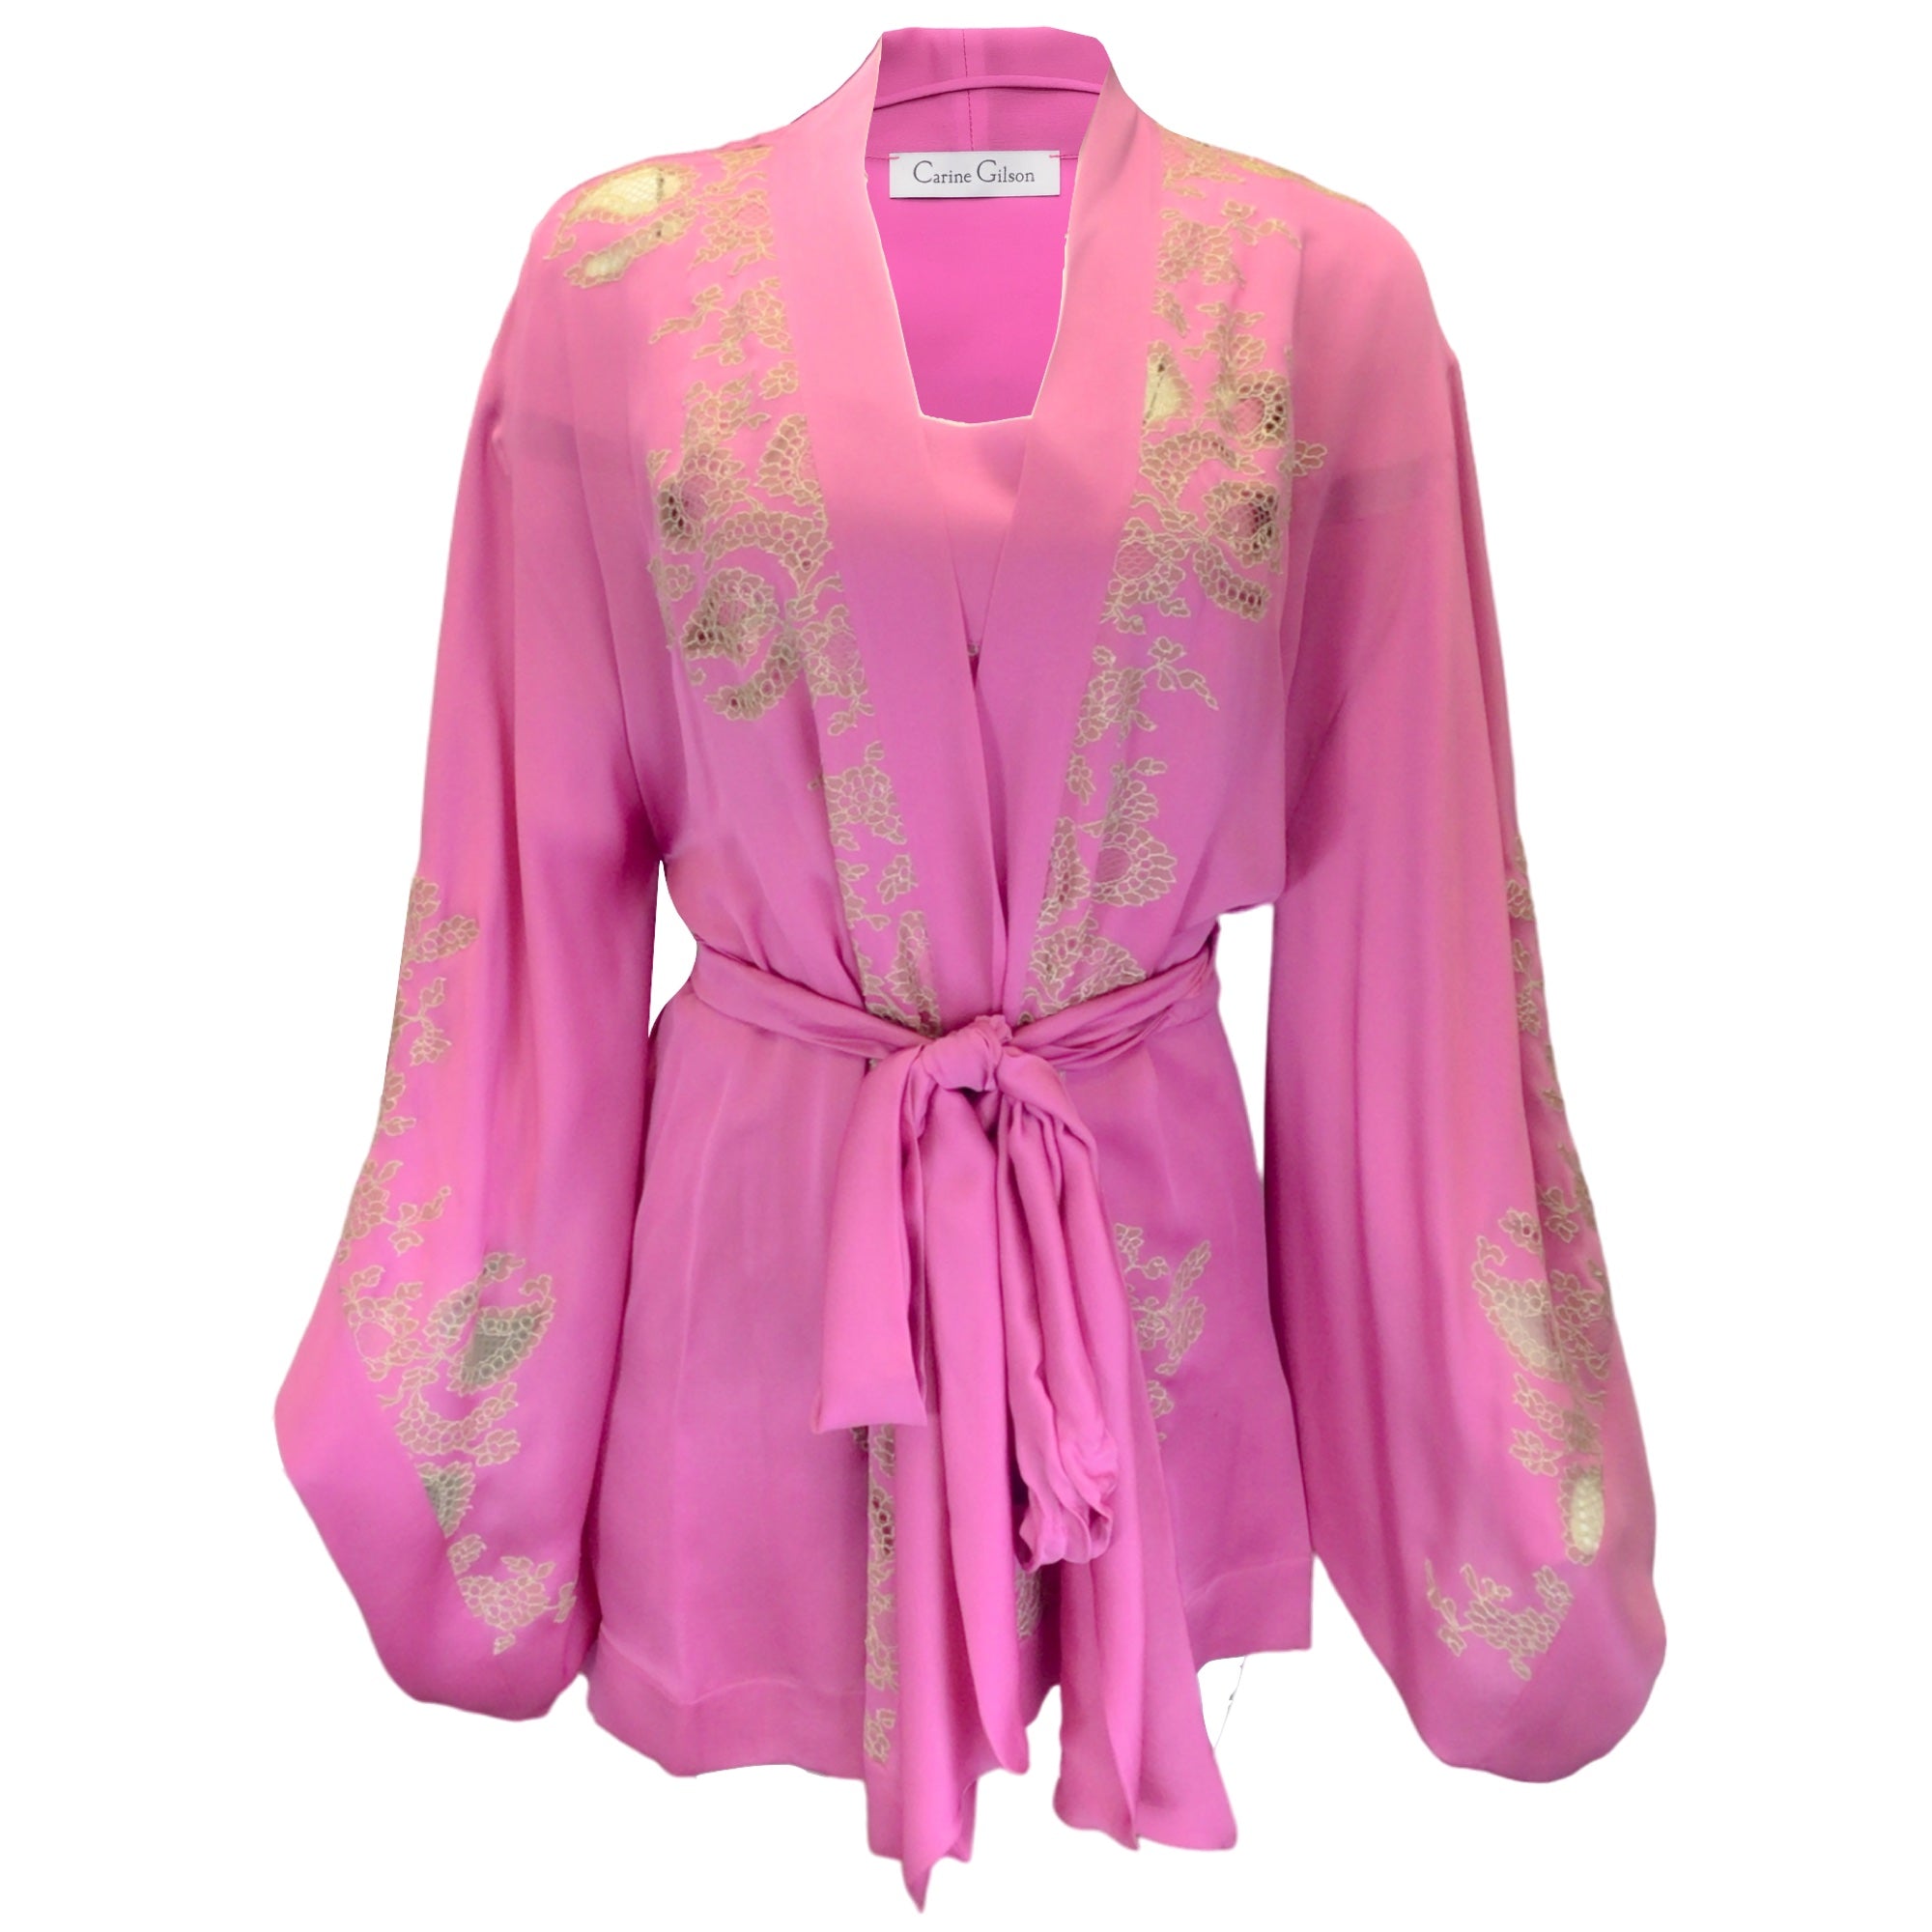 Carine Gilson Pink Lace Trimmed Belted Silk Robe and Camisole Two-Piece Set